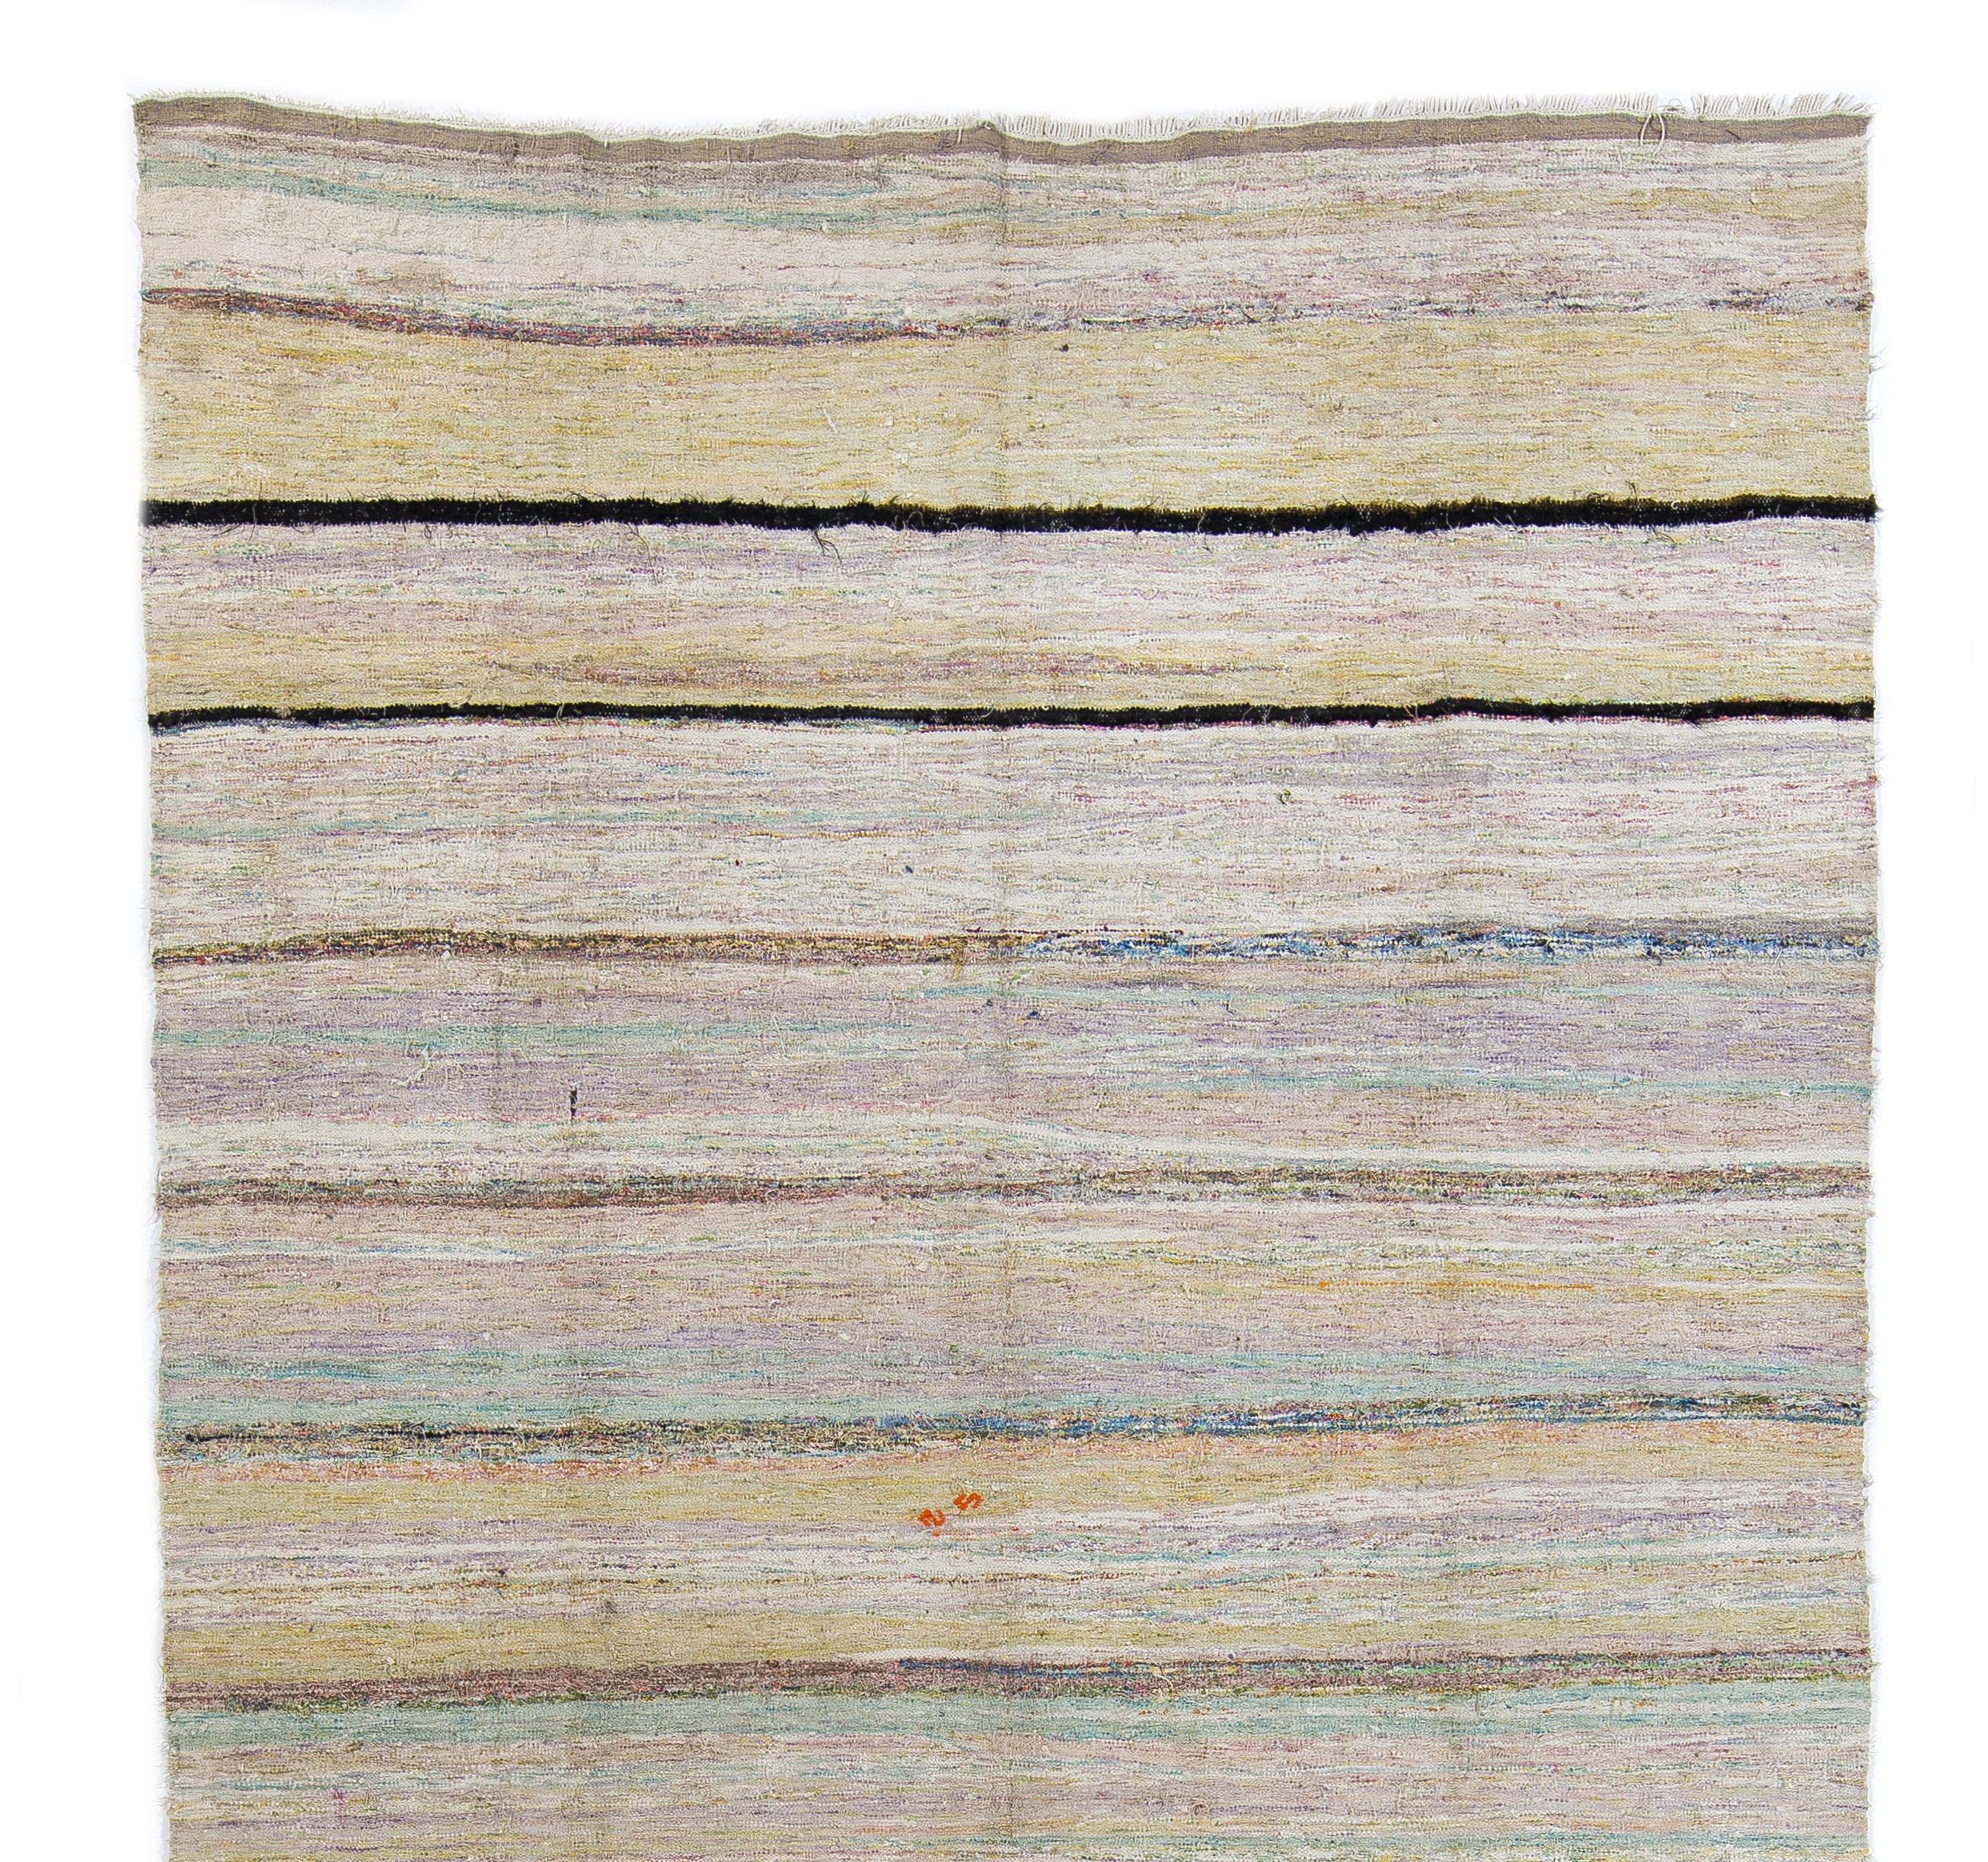 Turkish 6.5x12.8 Ft Cotton Hand-Woven Striped Kilim Rug in Pastel Colors, Reversible For Sale